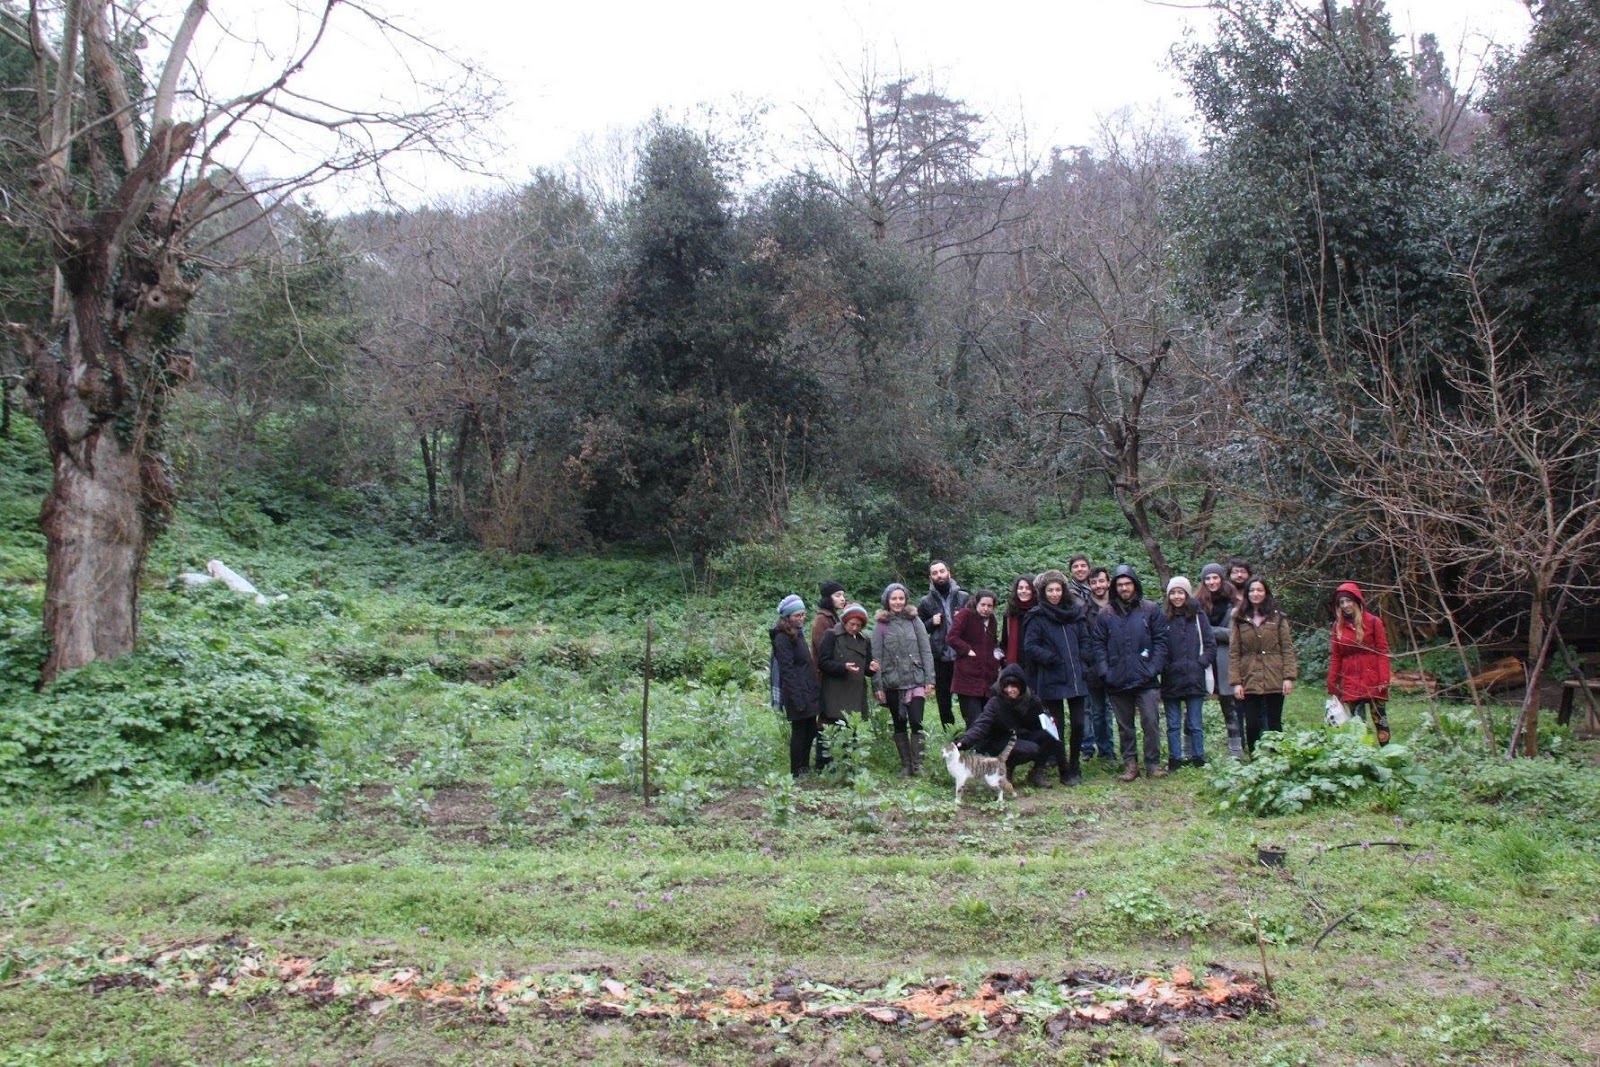 A group of people standing in a field

Description automatically generated with medium confidence